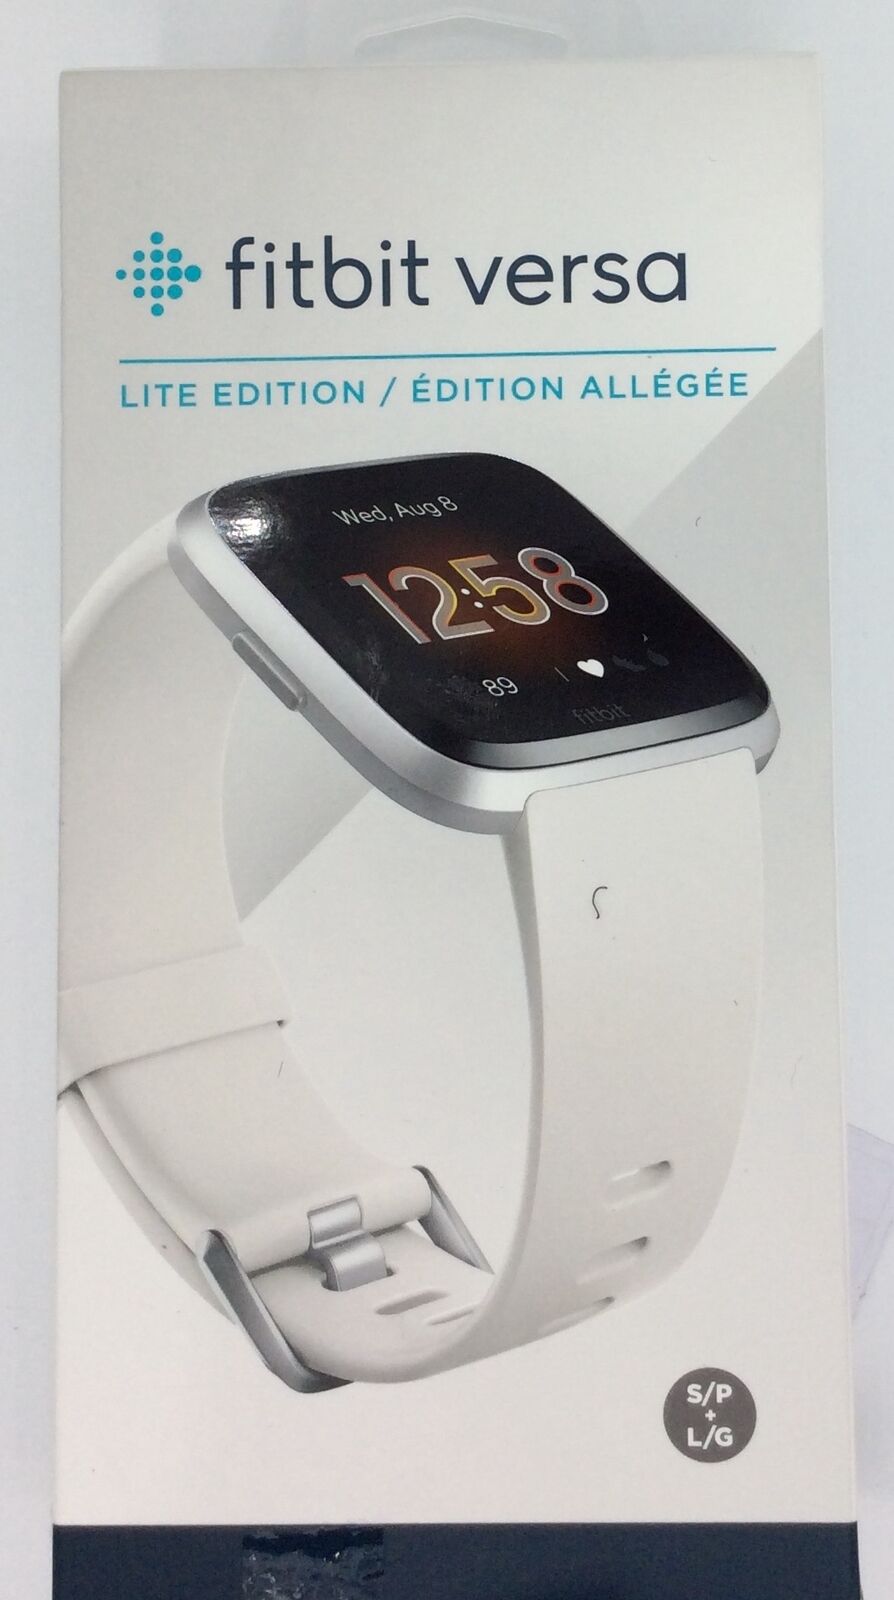 Restored Fitbit FB415SRWT Versa Smart Watch, One Size (S & L Bands Included) White/Silver Aluminum Lite Edition (Refurbished) - image 1 of 4